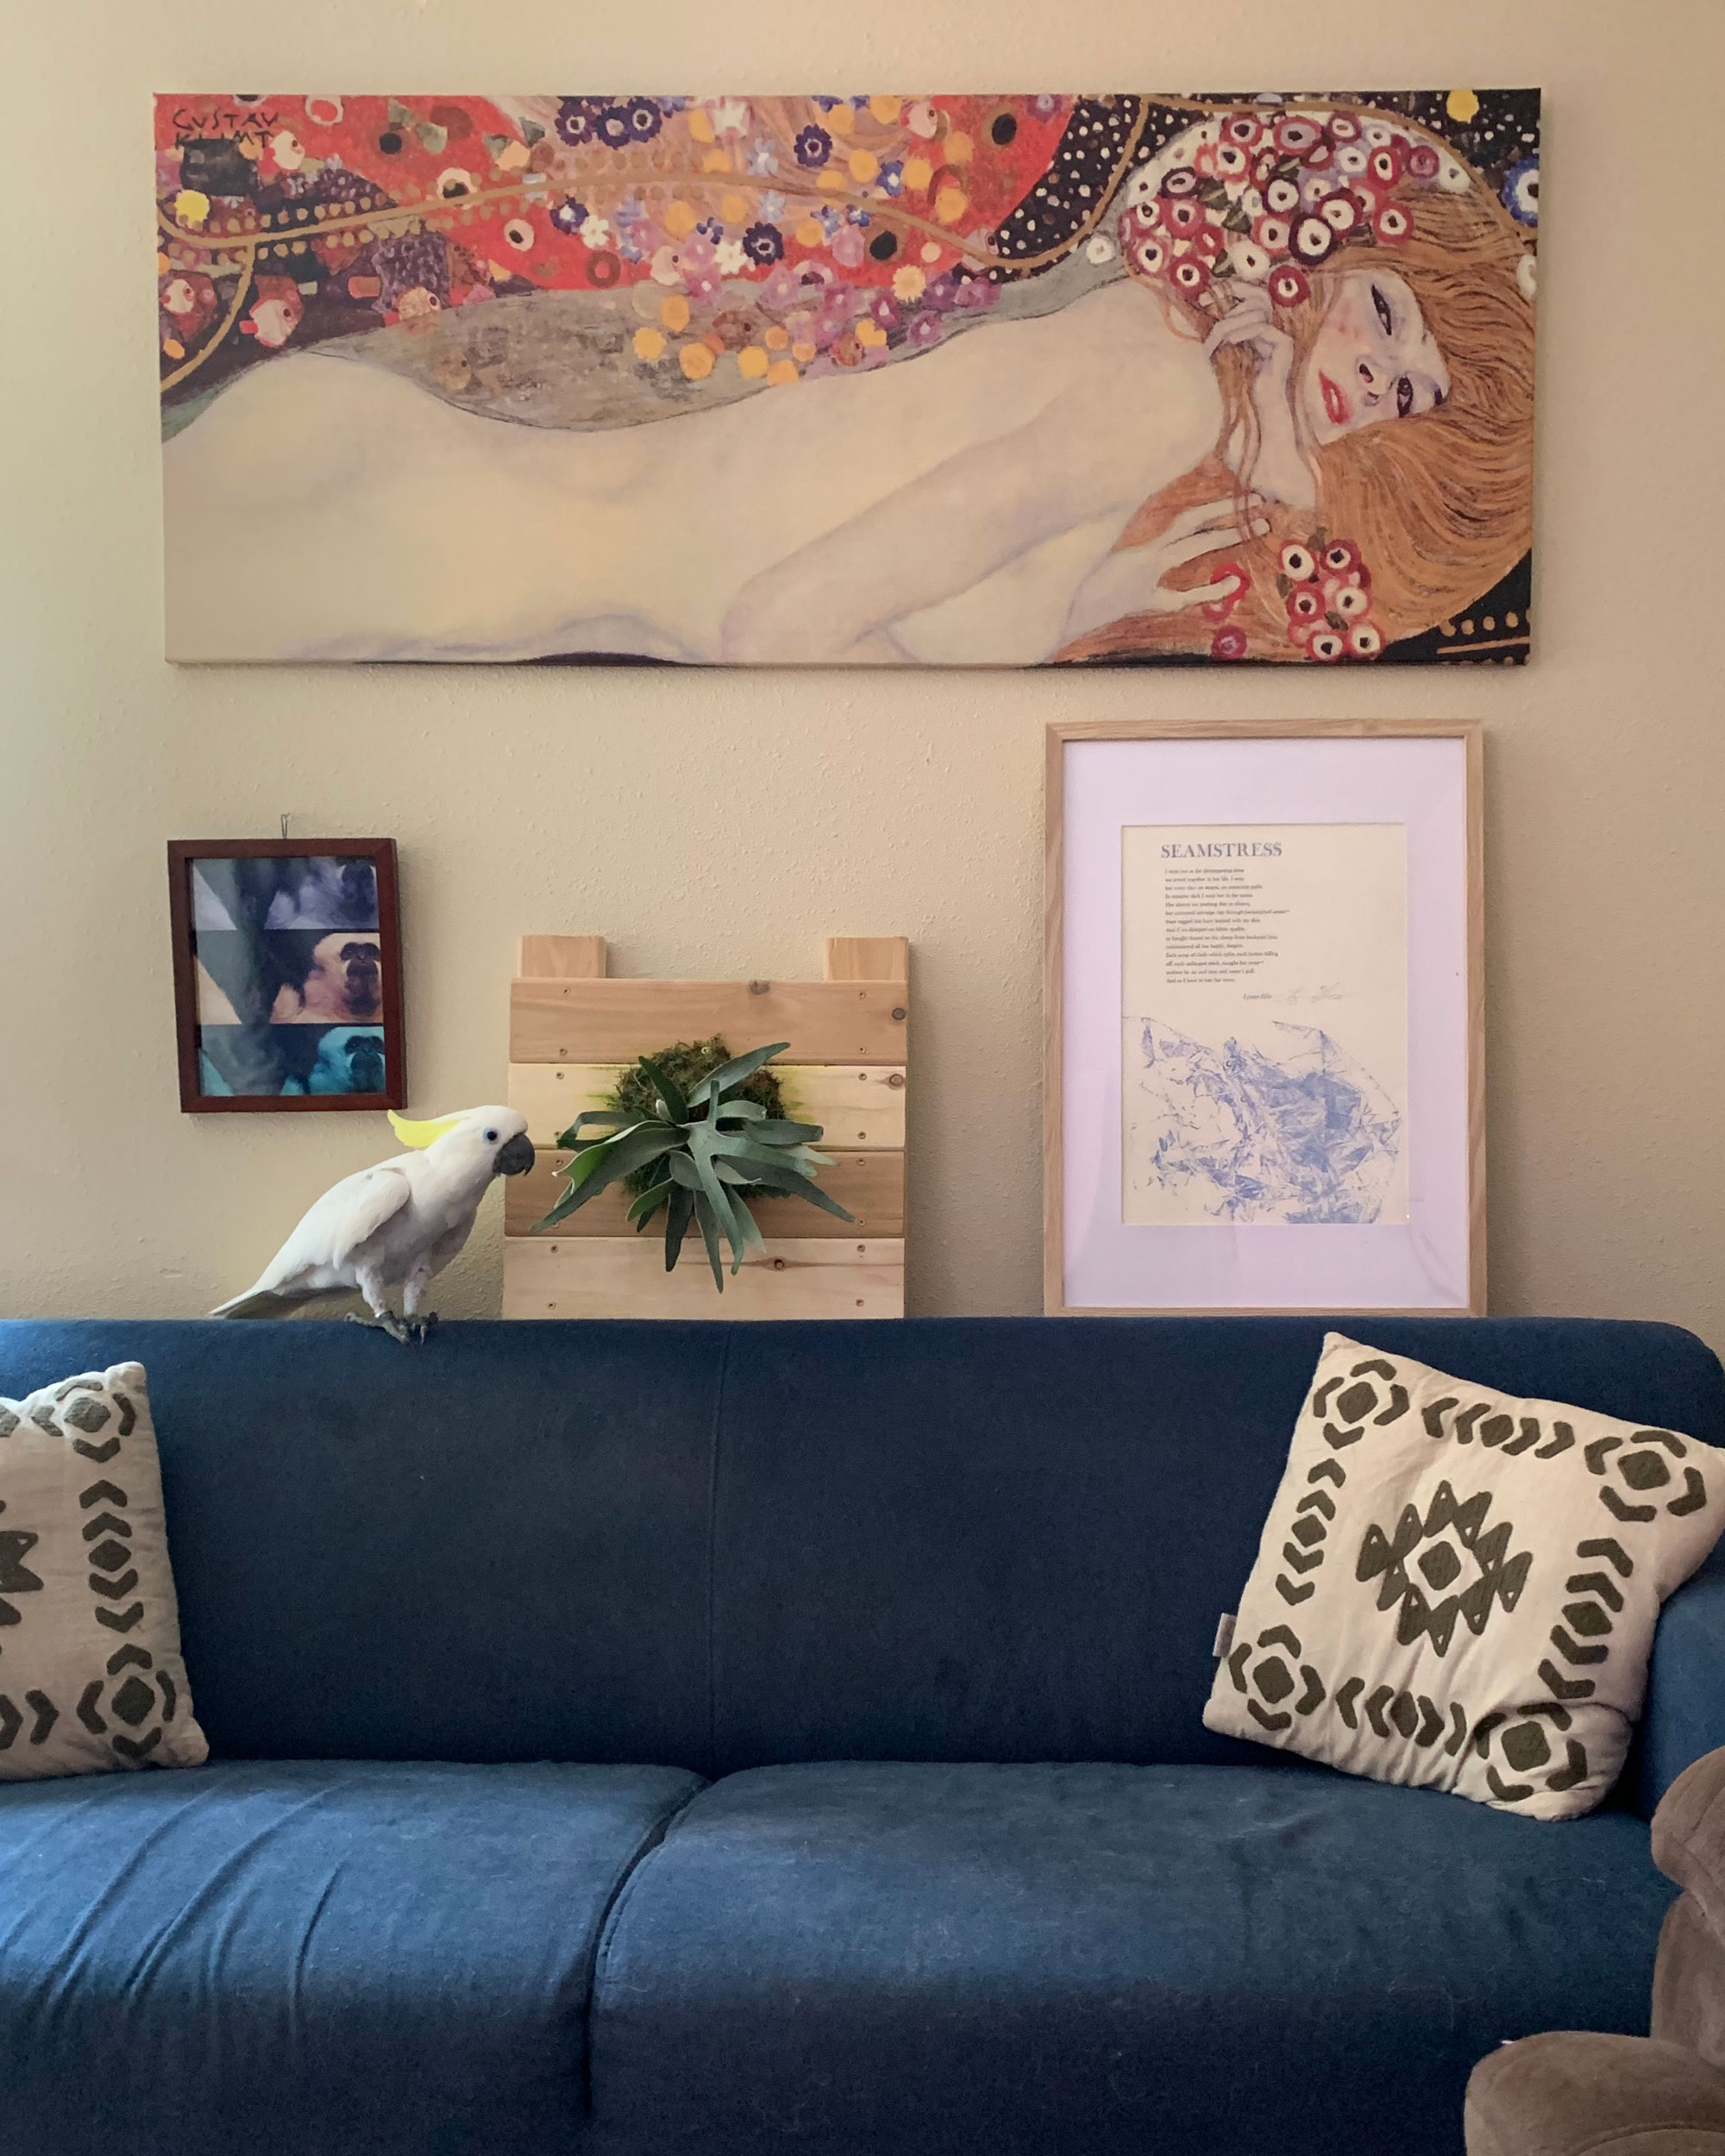 A domestic space with a blue couch and brown pillows. A large decorative painting of a nude figure hangs on the wall along with a few other pictures including the Seamstress broadside. A white cockatoo bird with a bright yellow crest is perched on the back of the sofa.